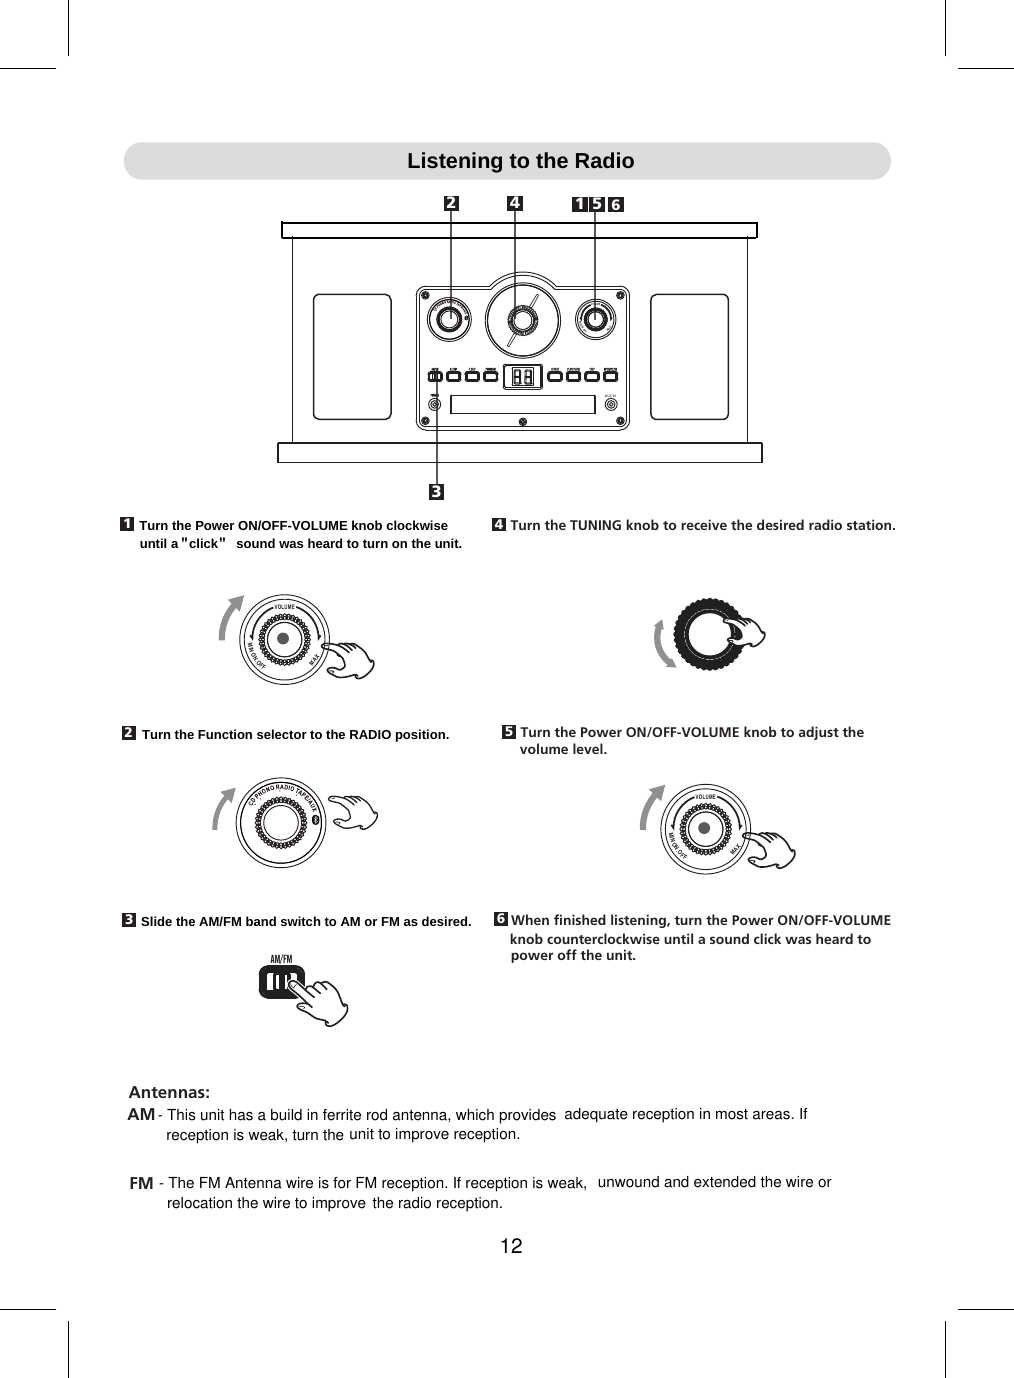 Page 13 of Junlan Electronic SRCD838BT Nostalgia 6 in 1 Turntable Radio User Manual                     1